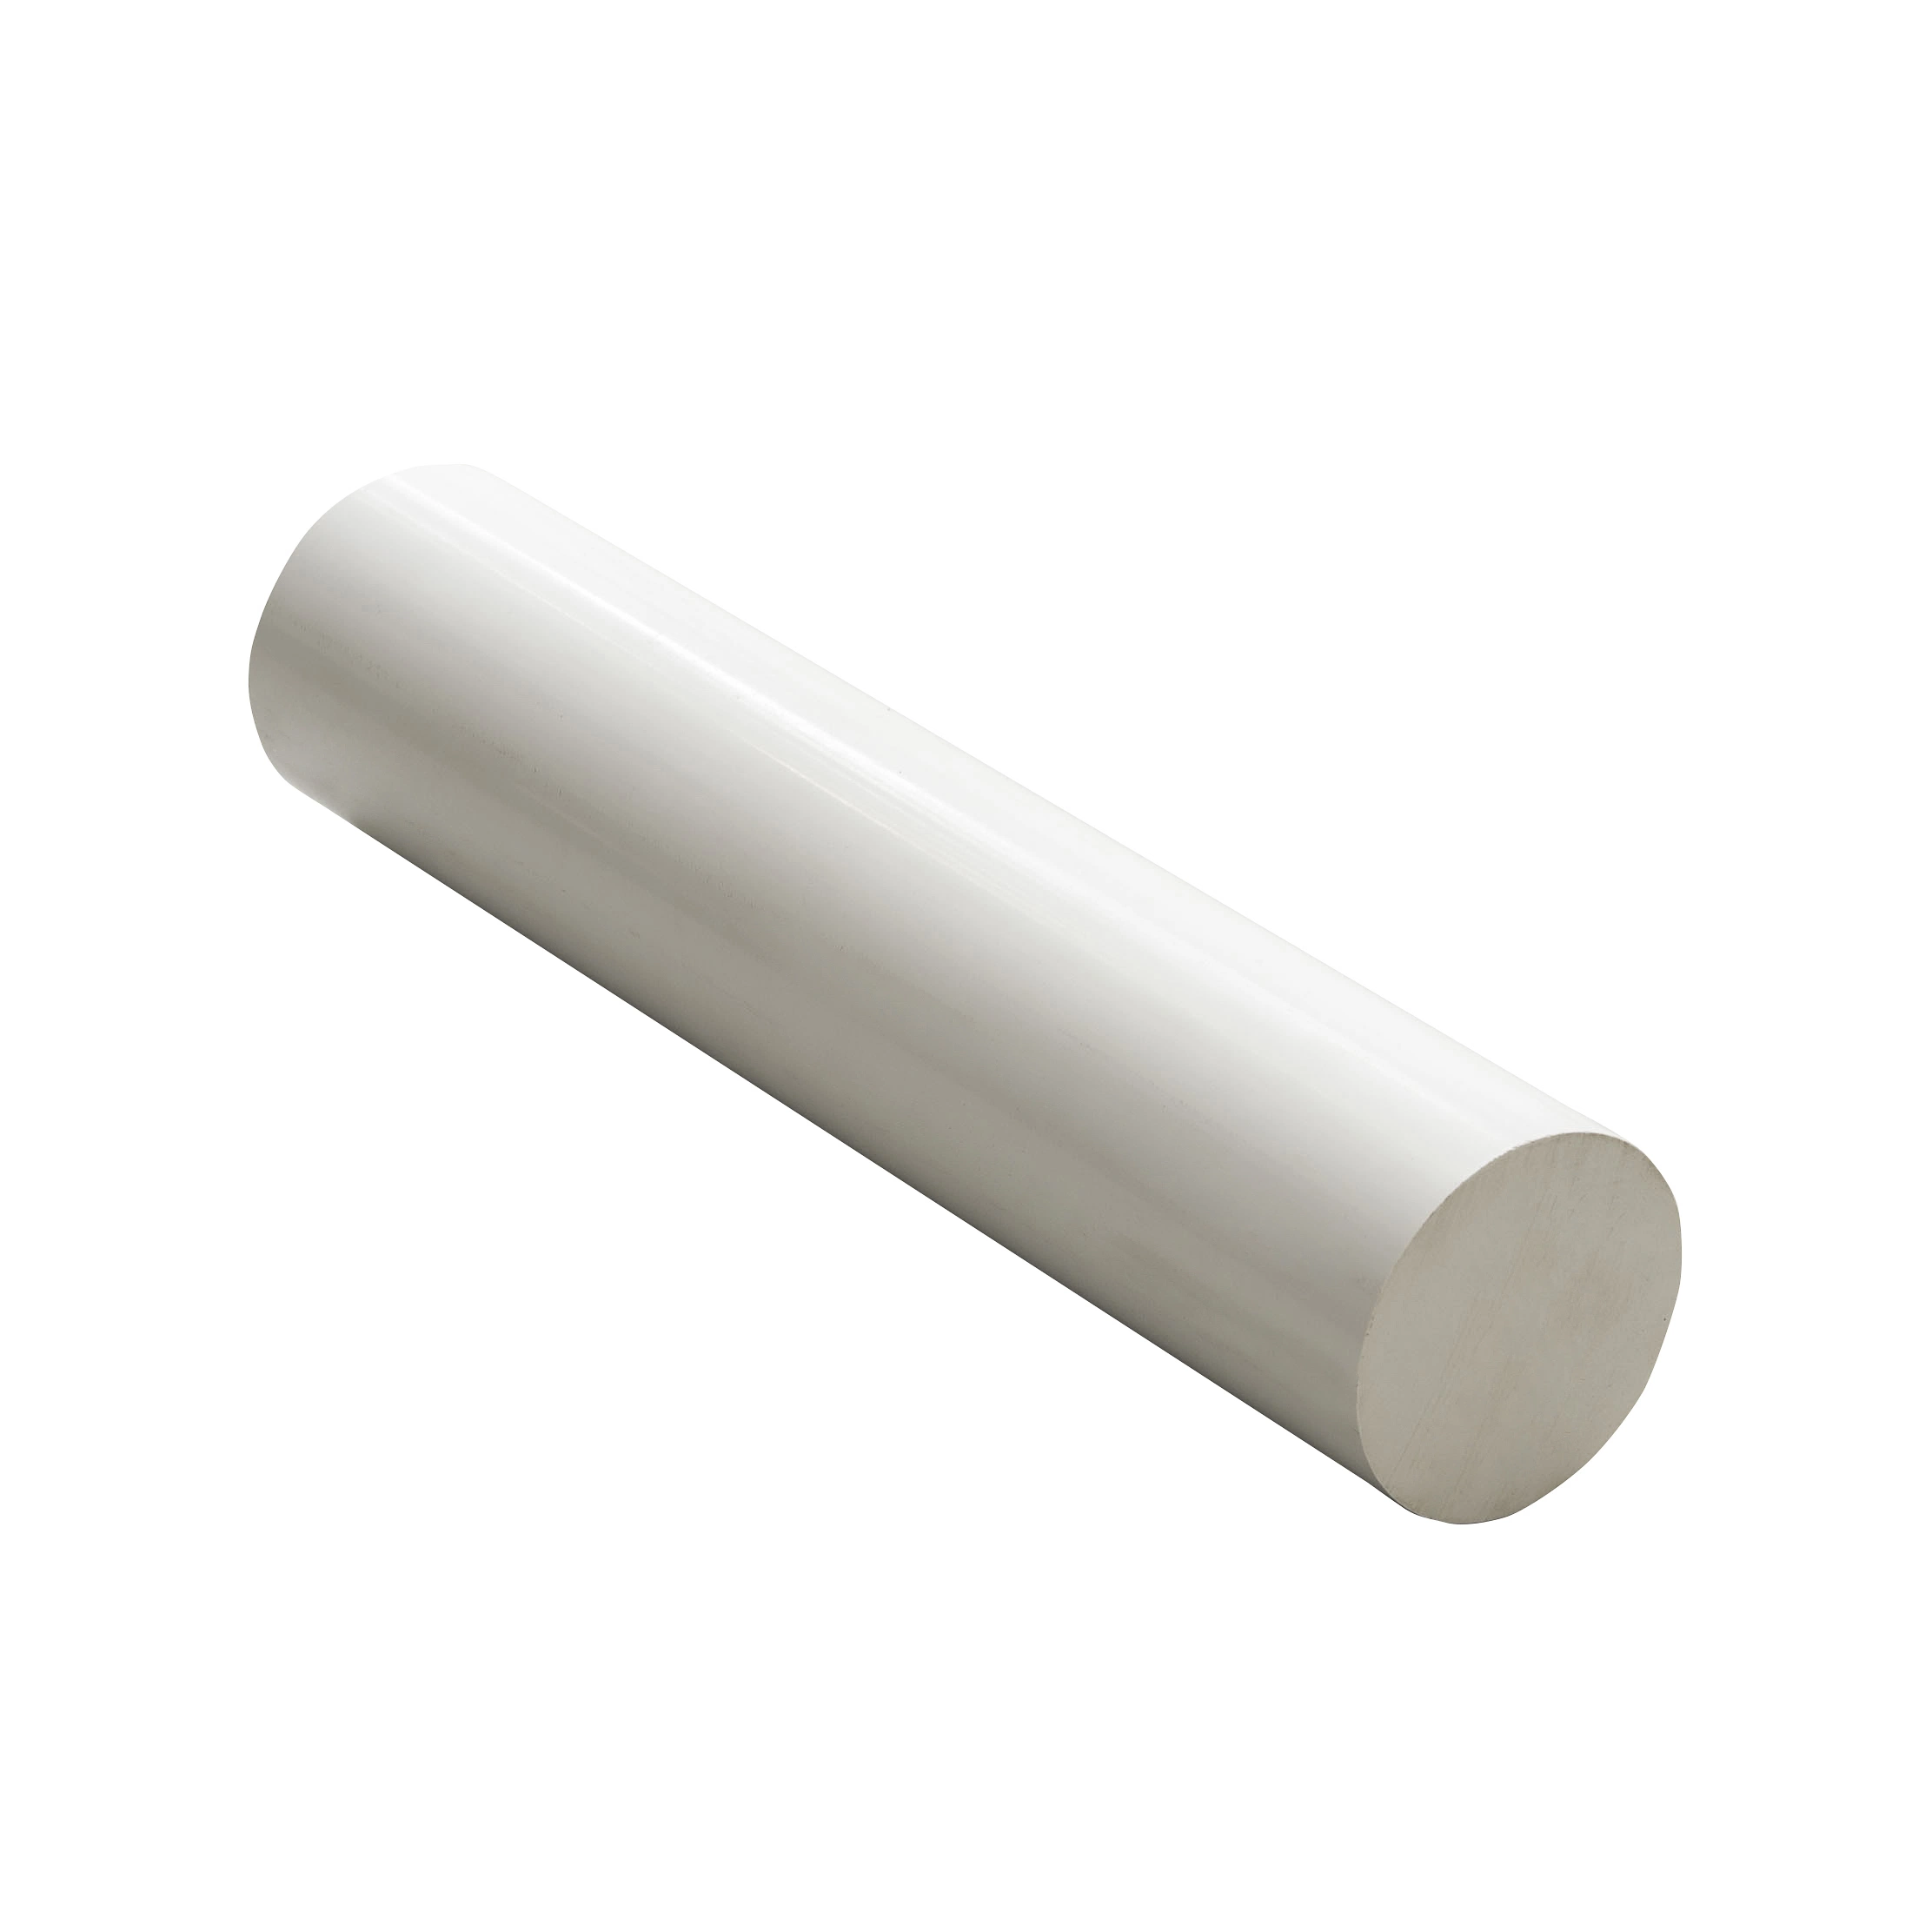 Wear-Resistant Grey Plastic PVC Bars / Rods with High Hardness